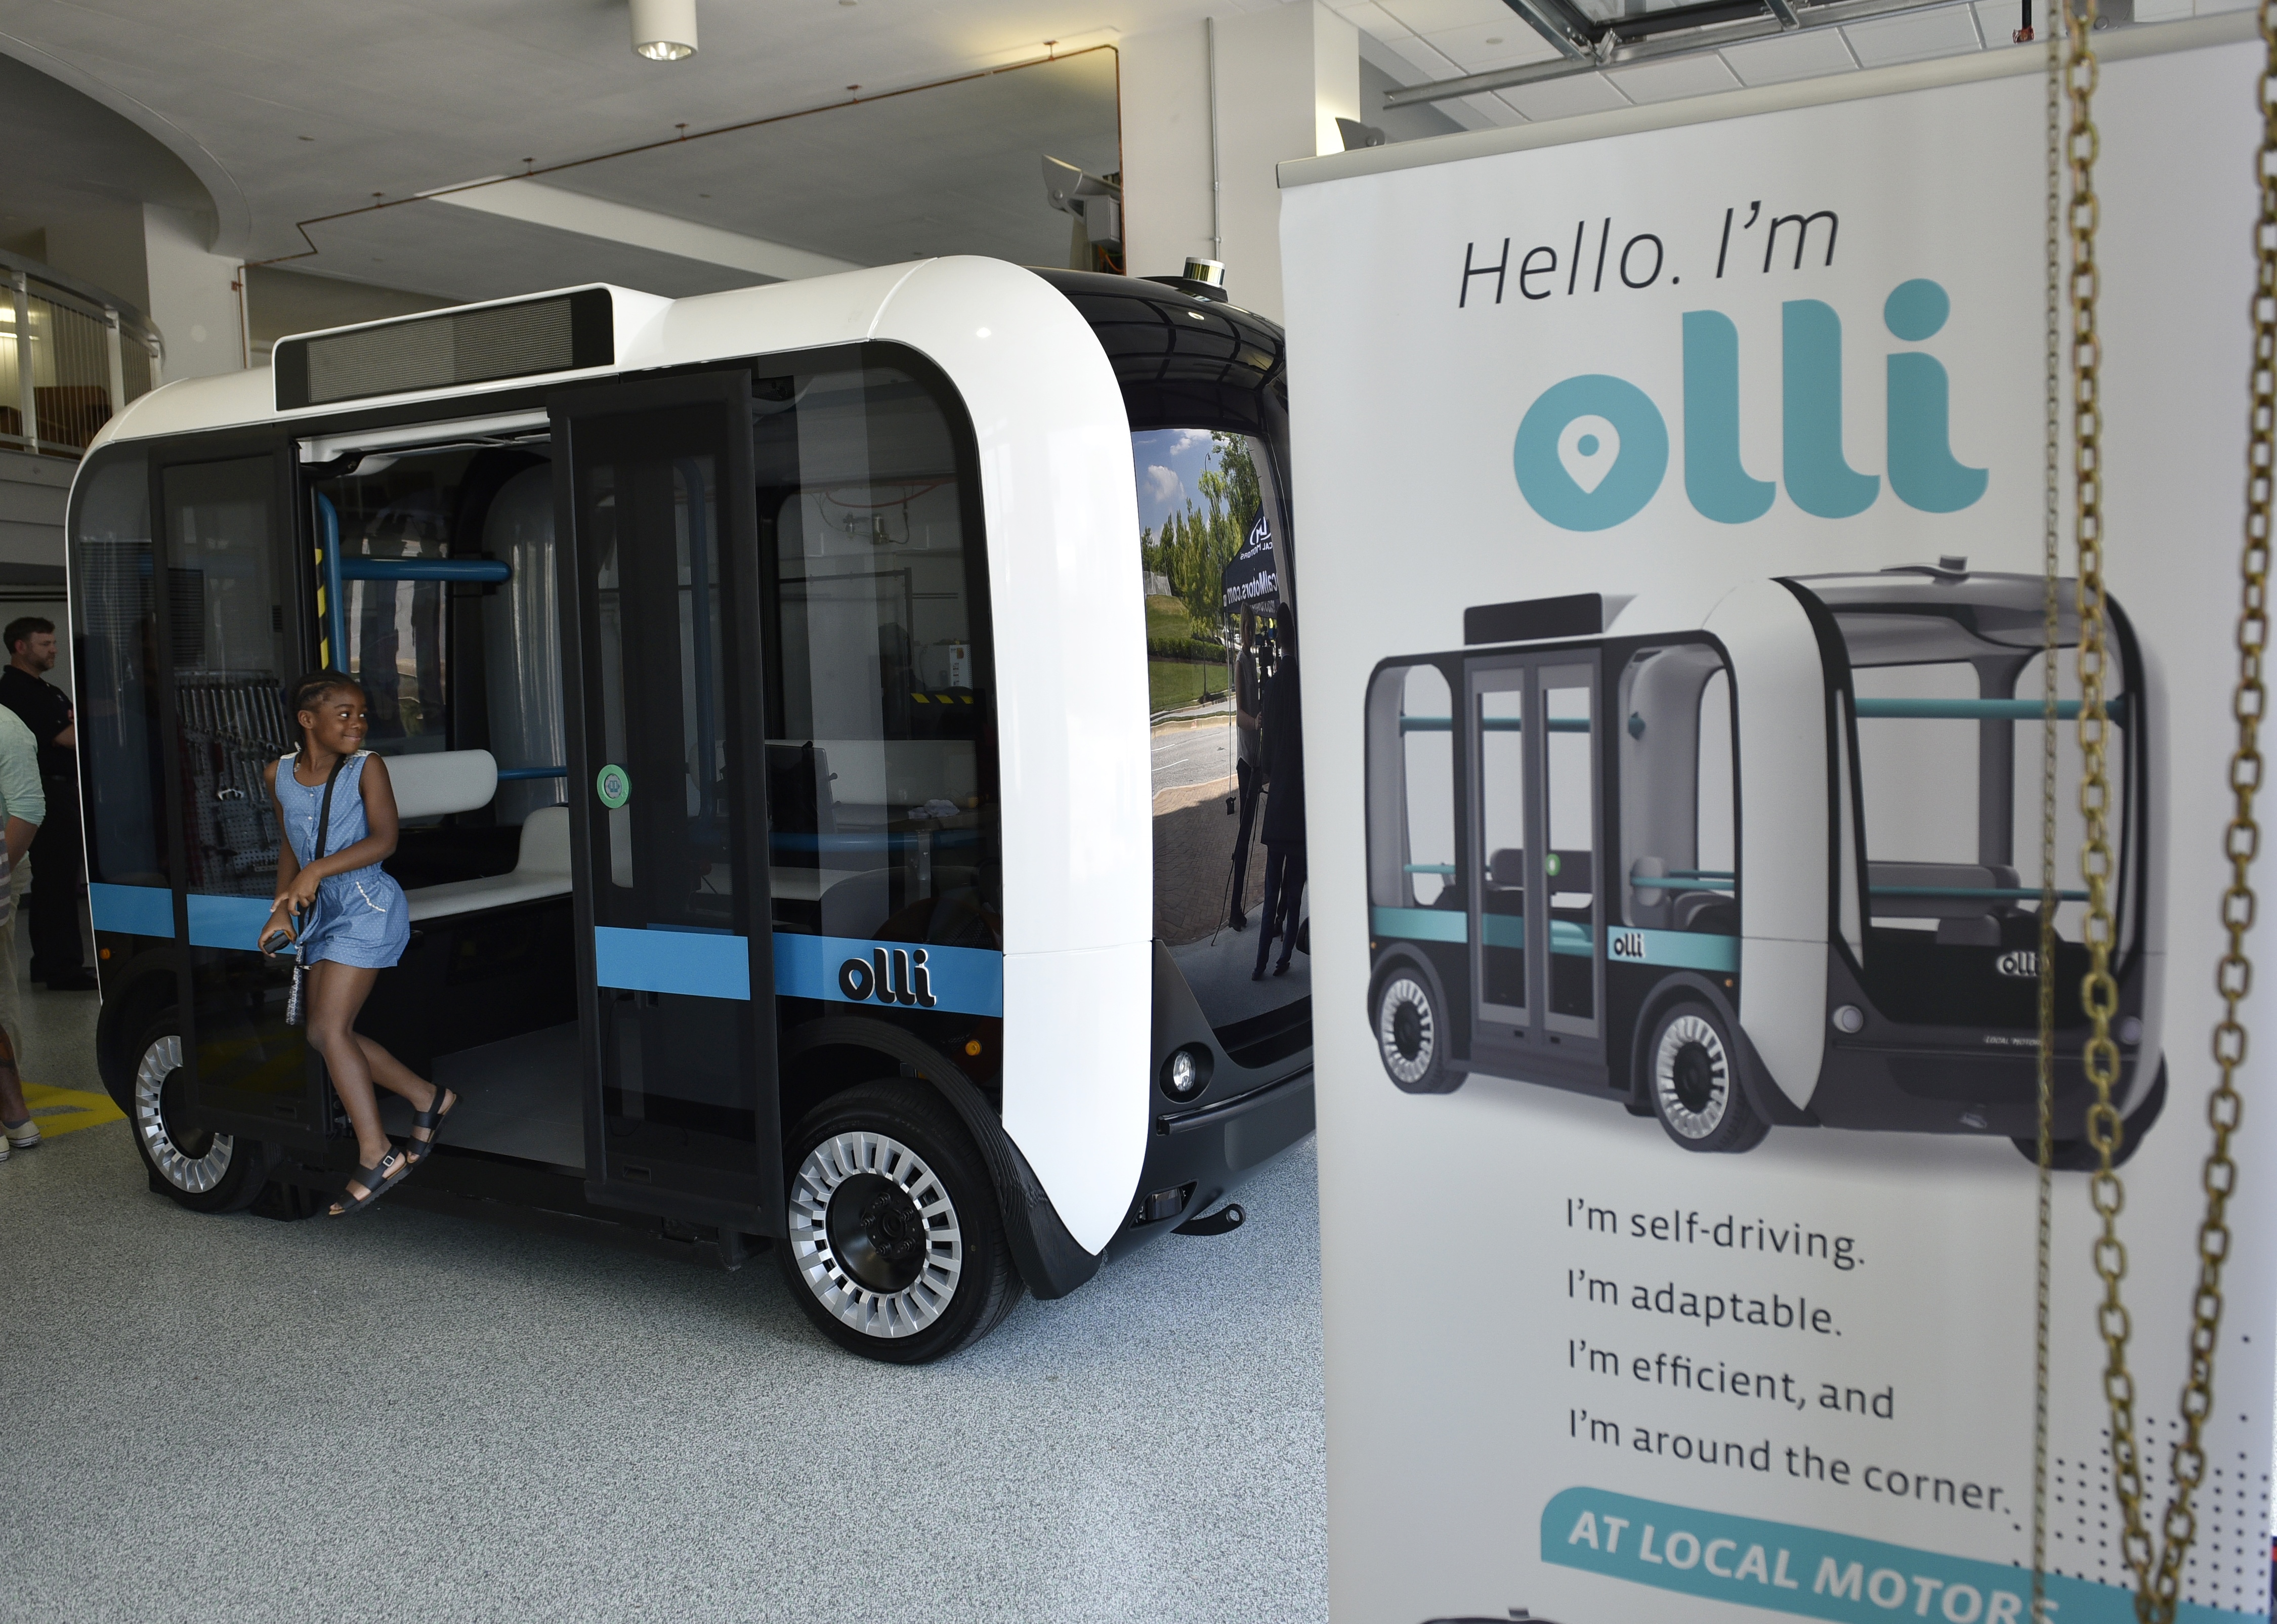 "Olli" an autonomous shuttle is seen at the Local Motors facility at the National Harbor in Maryland on June 16, 2016. The electric self-driving shuttle is partnership between Local Motors and IBM, using IBM's Watson supercomputer. / AFP PHOTO / Mandel Ngan